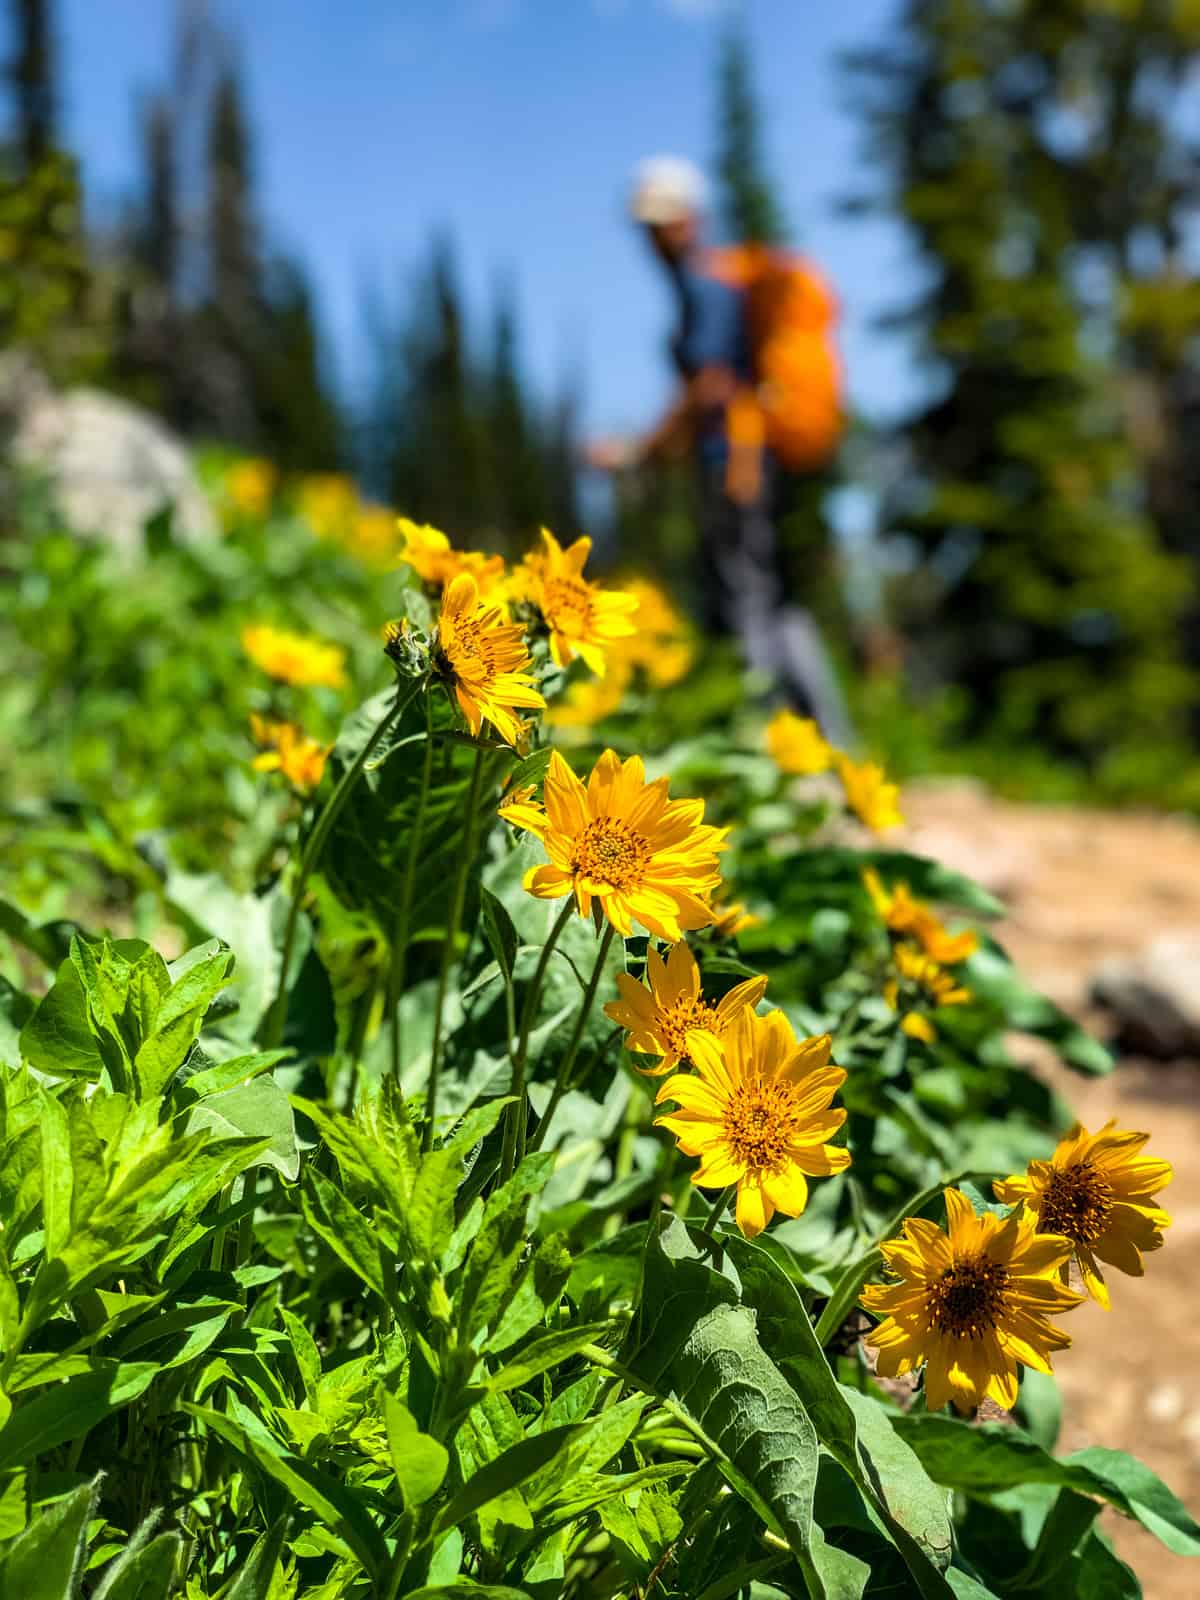 Sunflowers in the foreground and a man with an orange backpack hiking up the trail blurred out in the background.